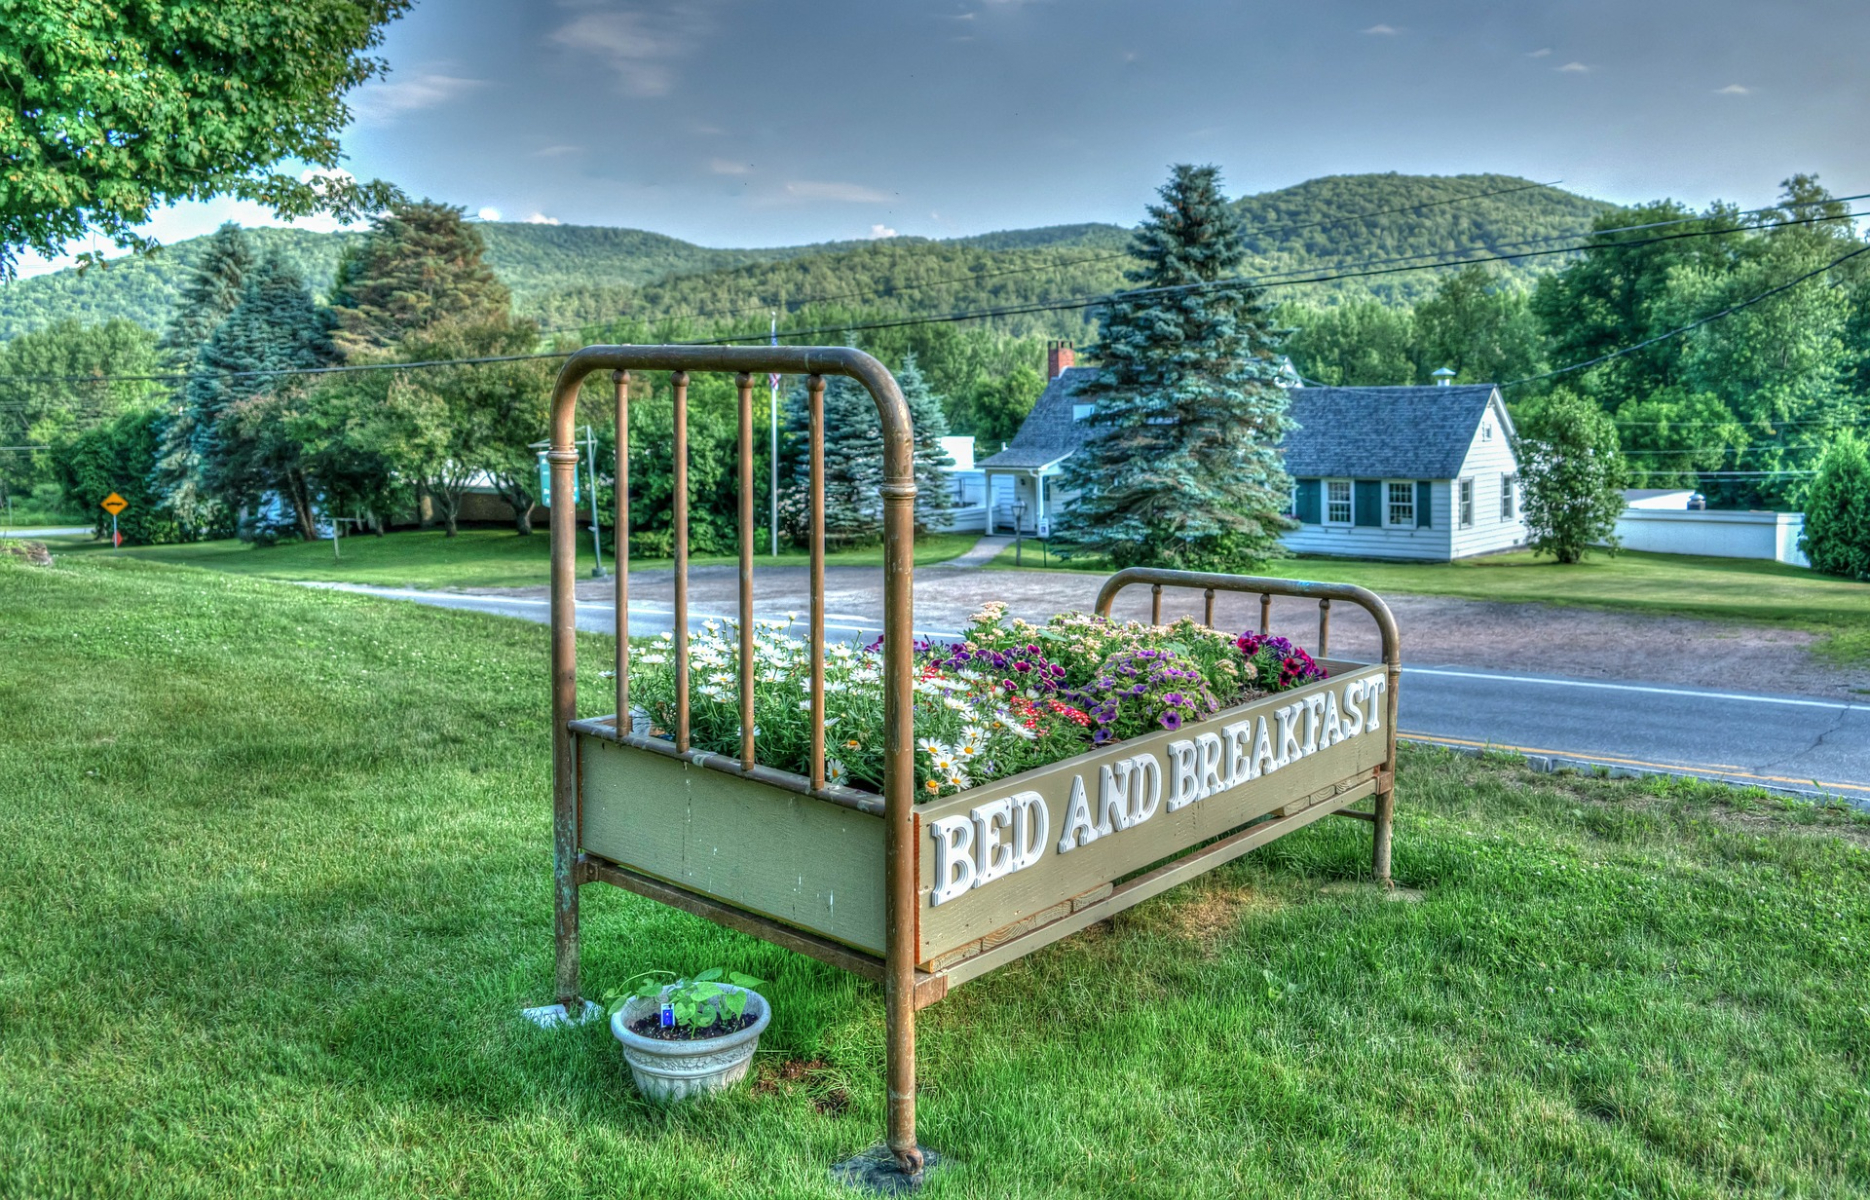 <p>Sometimes called Vermont’s “Main Street,” <a href="https://backroadramblers.com/route-100-vermont-road-trip-itinerary/" title="https://backroadramblers.com/route-100-vermont-road-trip-itinerary/">Route 100</a> is the state's longest state highway at 216.6 miles, providing a great scenic summer tour through the Green Mountains and a lot of quaint New England villages. Running from north to south in the center of Vermont, the highway provides lots of opportunities to pitch a tent in campgrounds, enjoy amazing vistas, and discover gorgeous lakes and hidden swimming holes.</p>